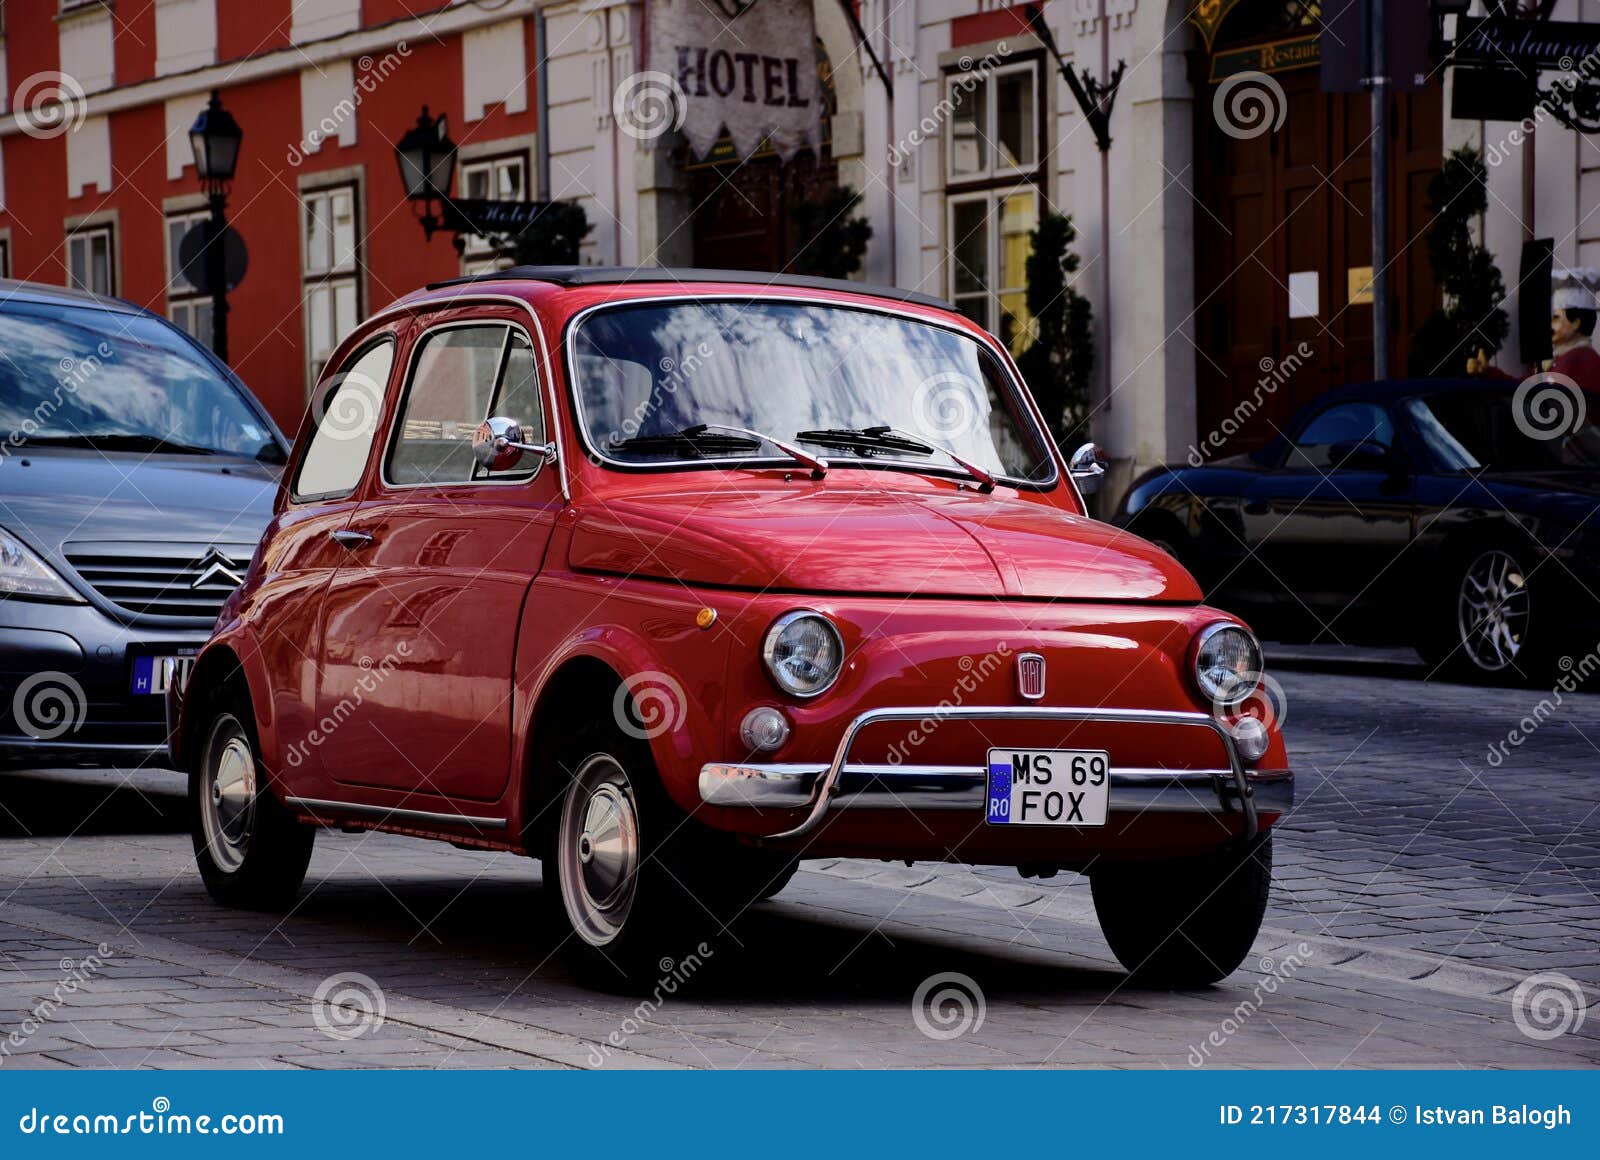 Vintage Red FIAT 500 Small Italian Car in Side View. Grunge Stucco